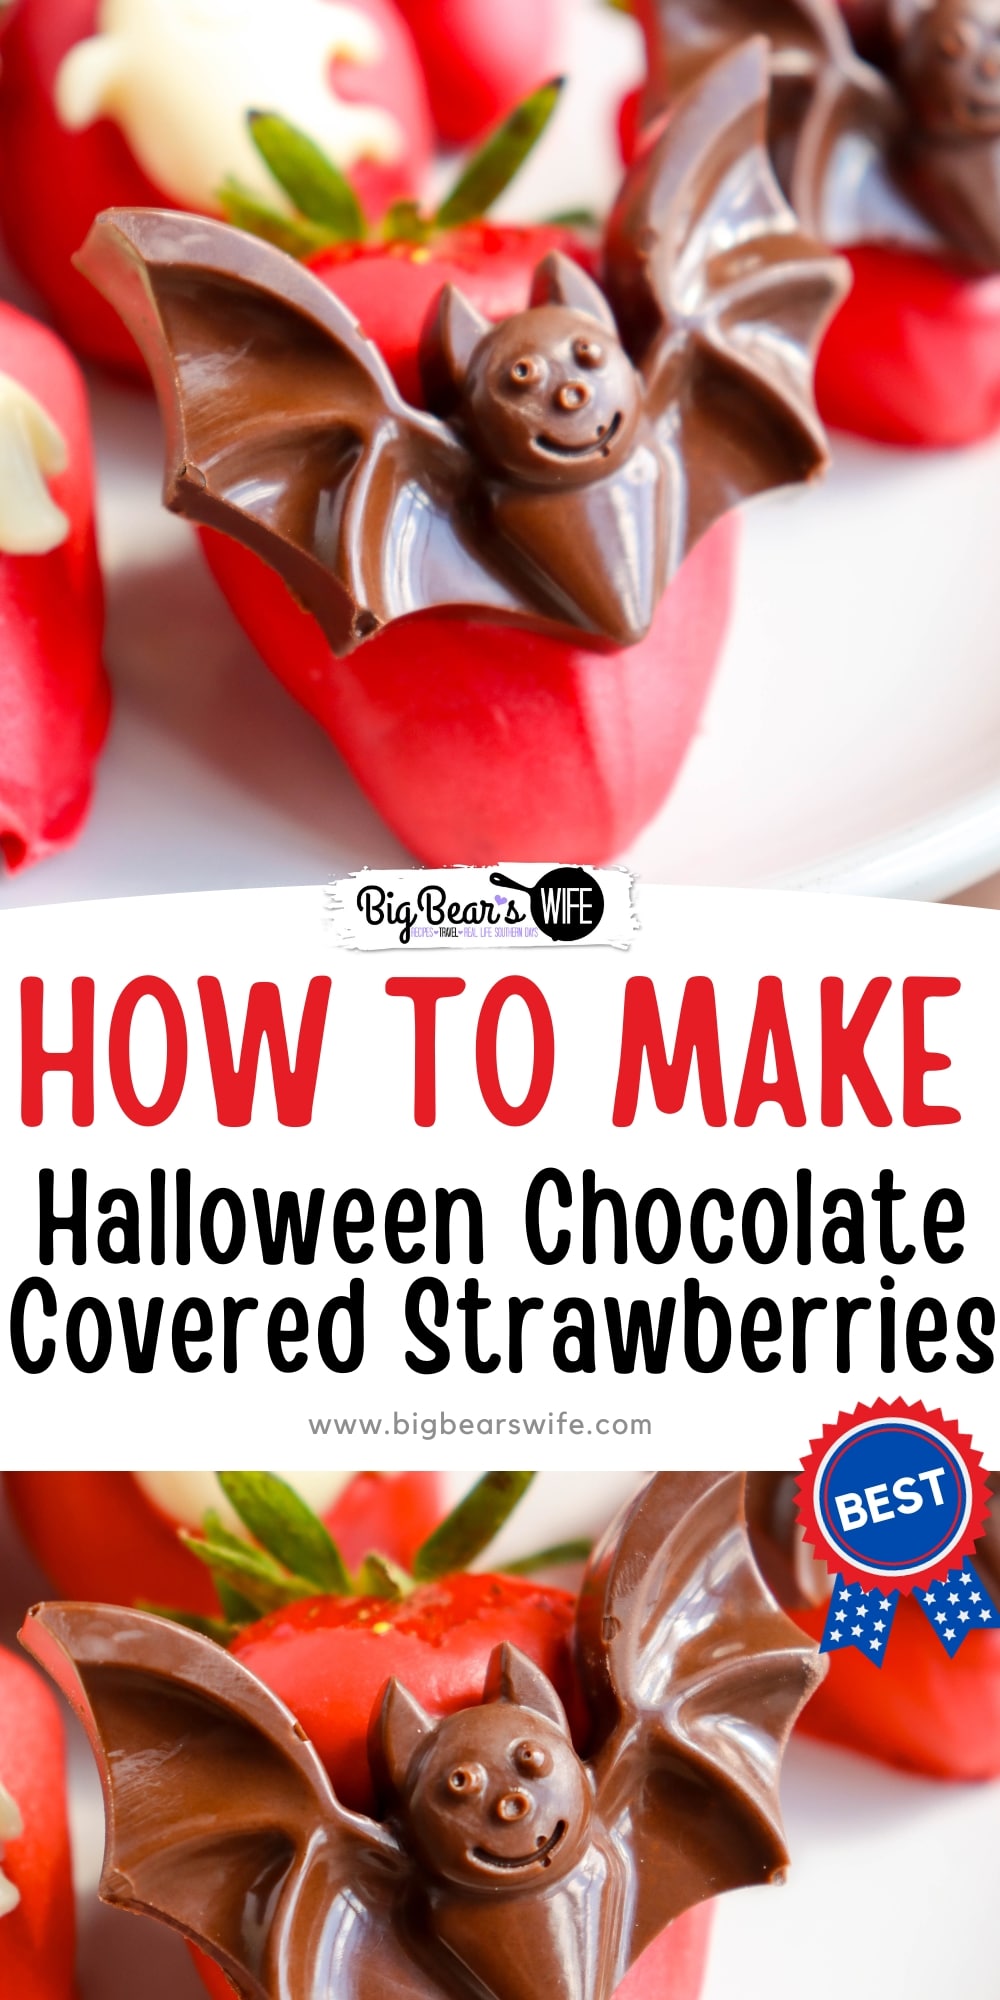 Get into the spirit of Halloween with spooky chocolate covered strawberries. Discover our step-by-step guide on how to craft these adorable and delicious Halloween Chocolate Covered Strawberries that will add a touch of spookiness to any gathering. Whether you're hosting a costume party or simply want to surprise your loved ones, these adorably haunting delights are sure to captivate everyone's attention. via @bigbearswife